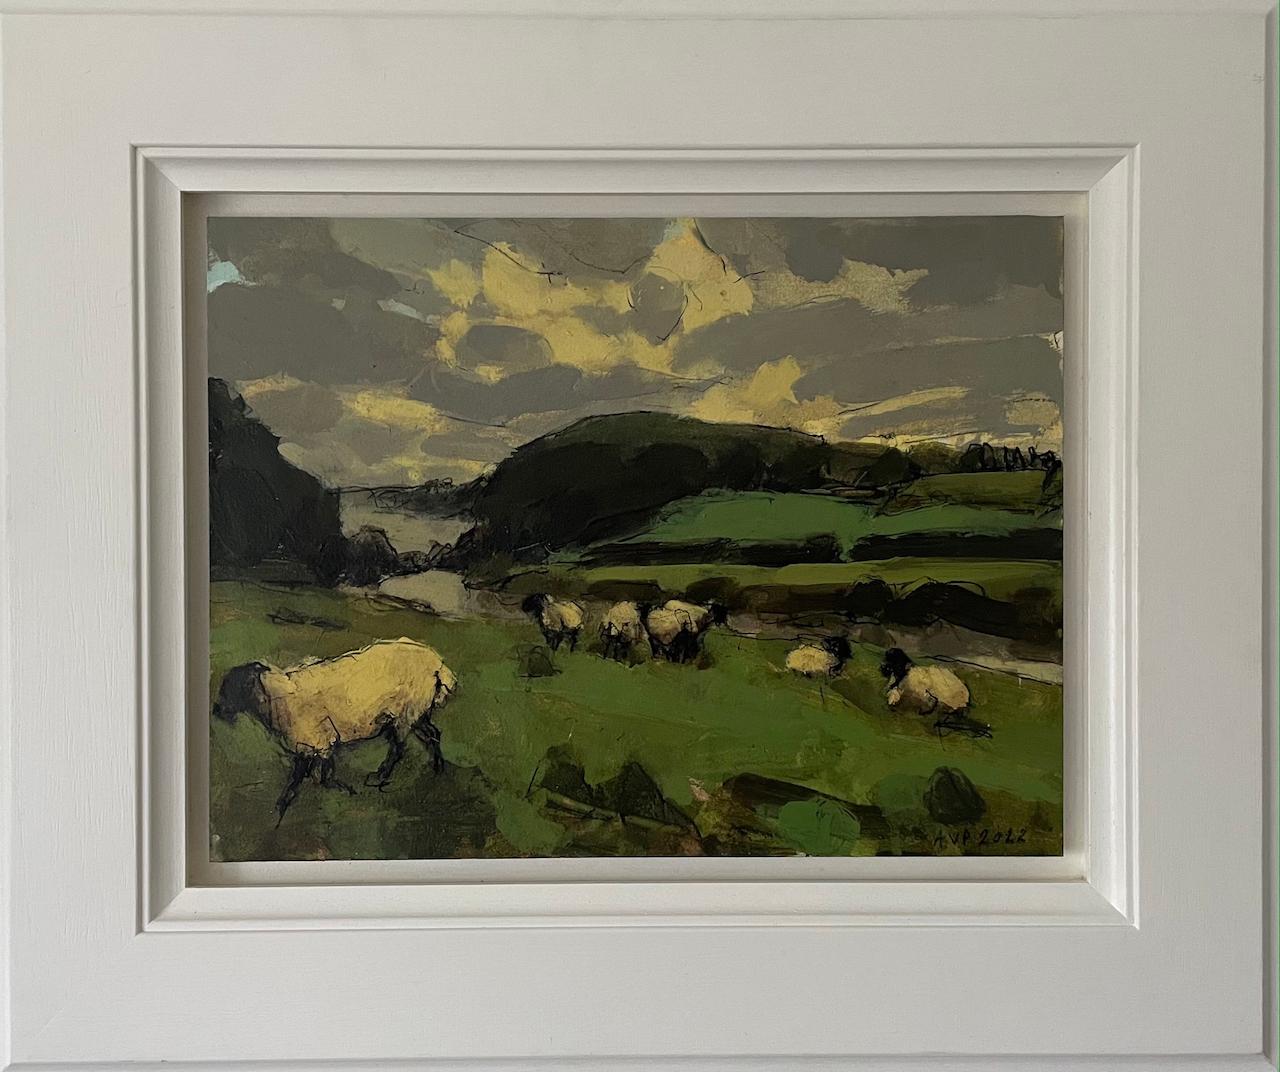 Early morning by the River Wye, Gloucestershire, October is an original oil painting by Anna Pinkster. It was inspired by time spent sketching on a misty morning waiting for the sun to rise in a beautiful spot by the River Wye between St Briavels in